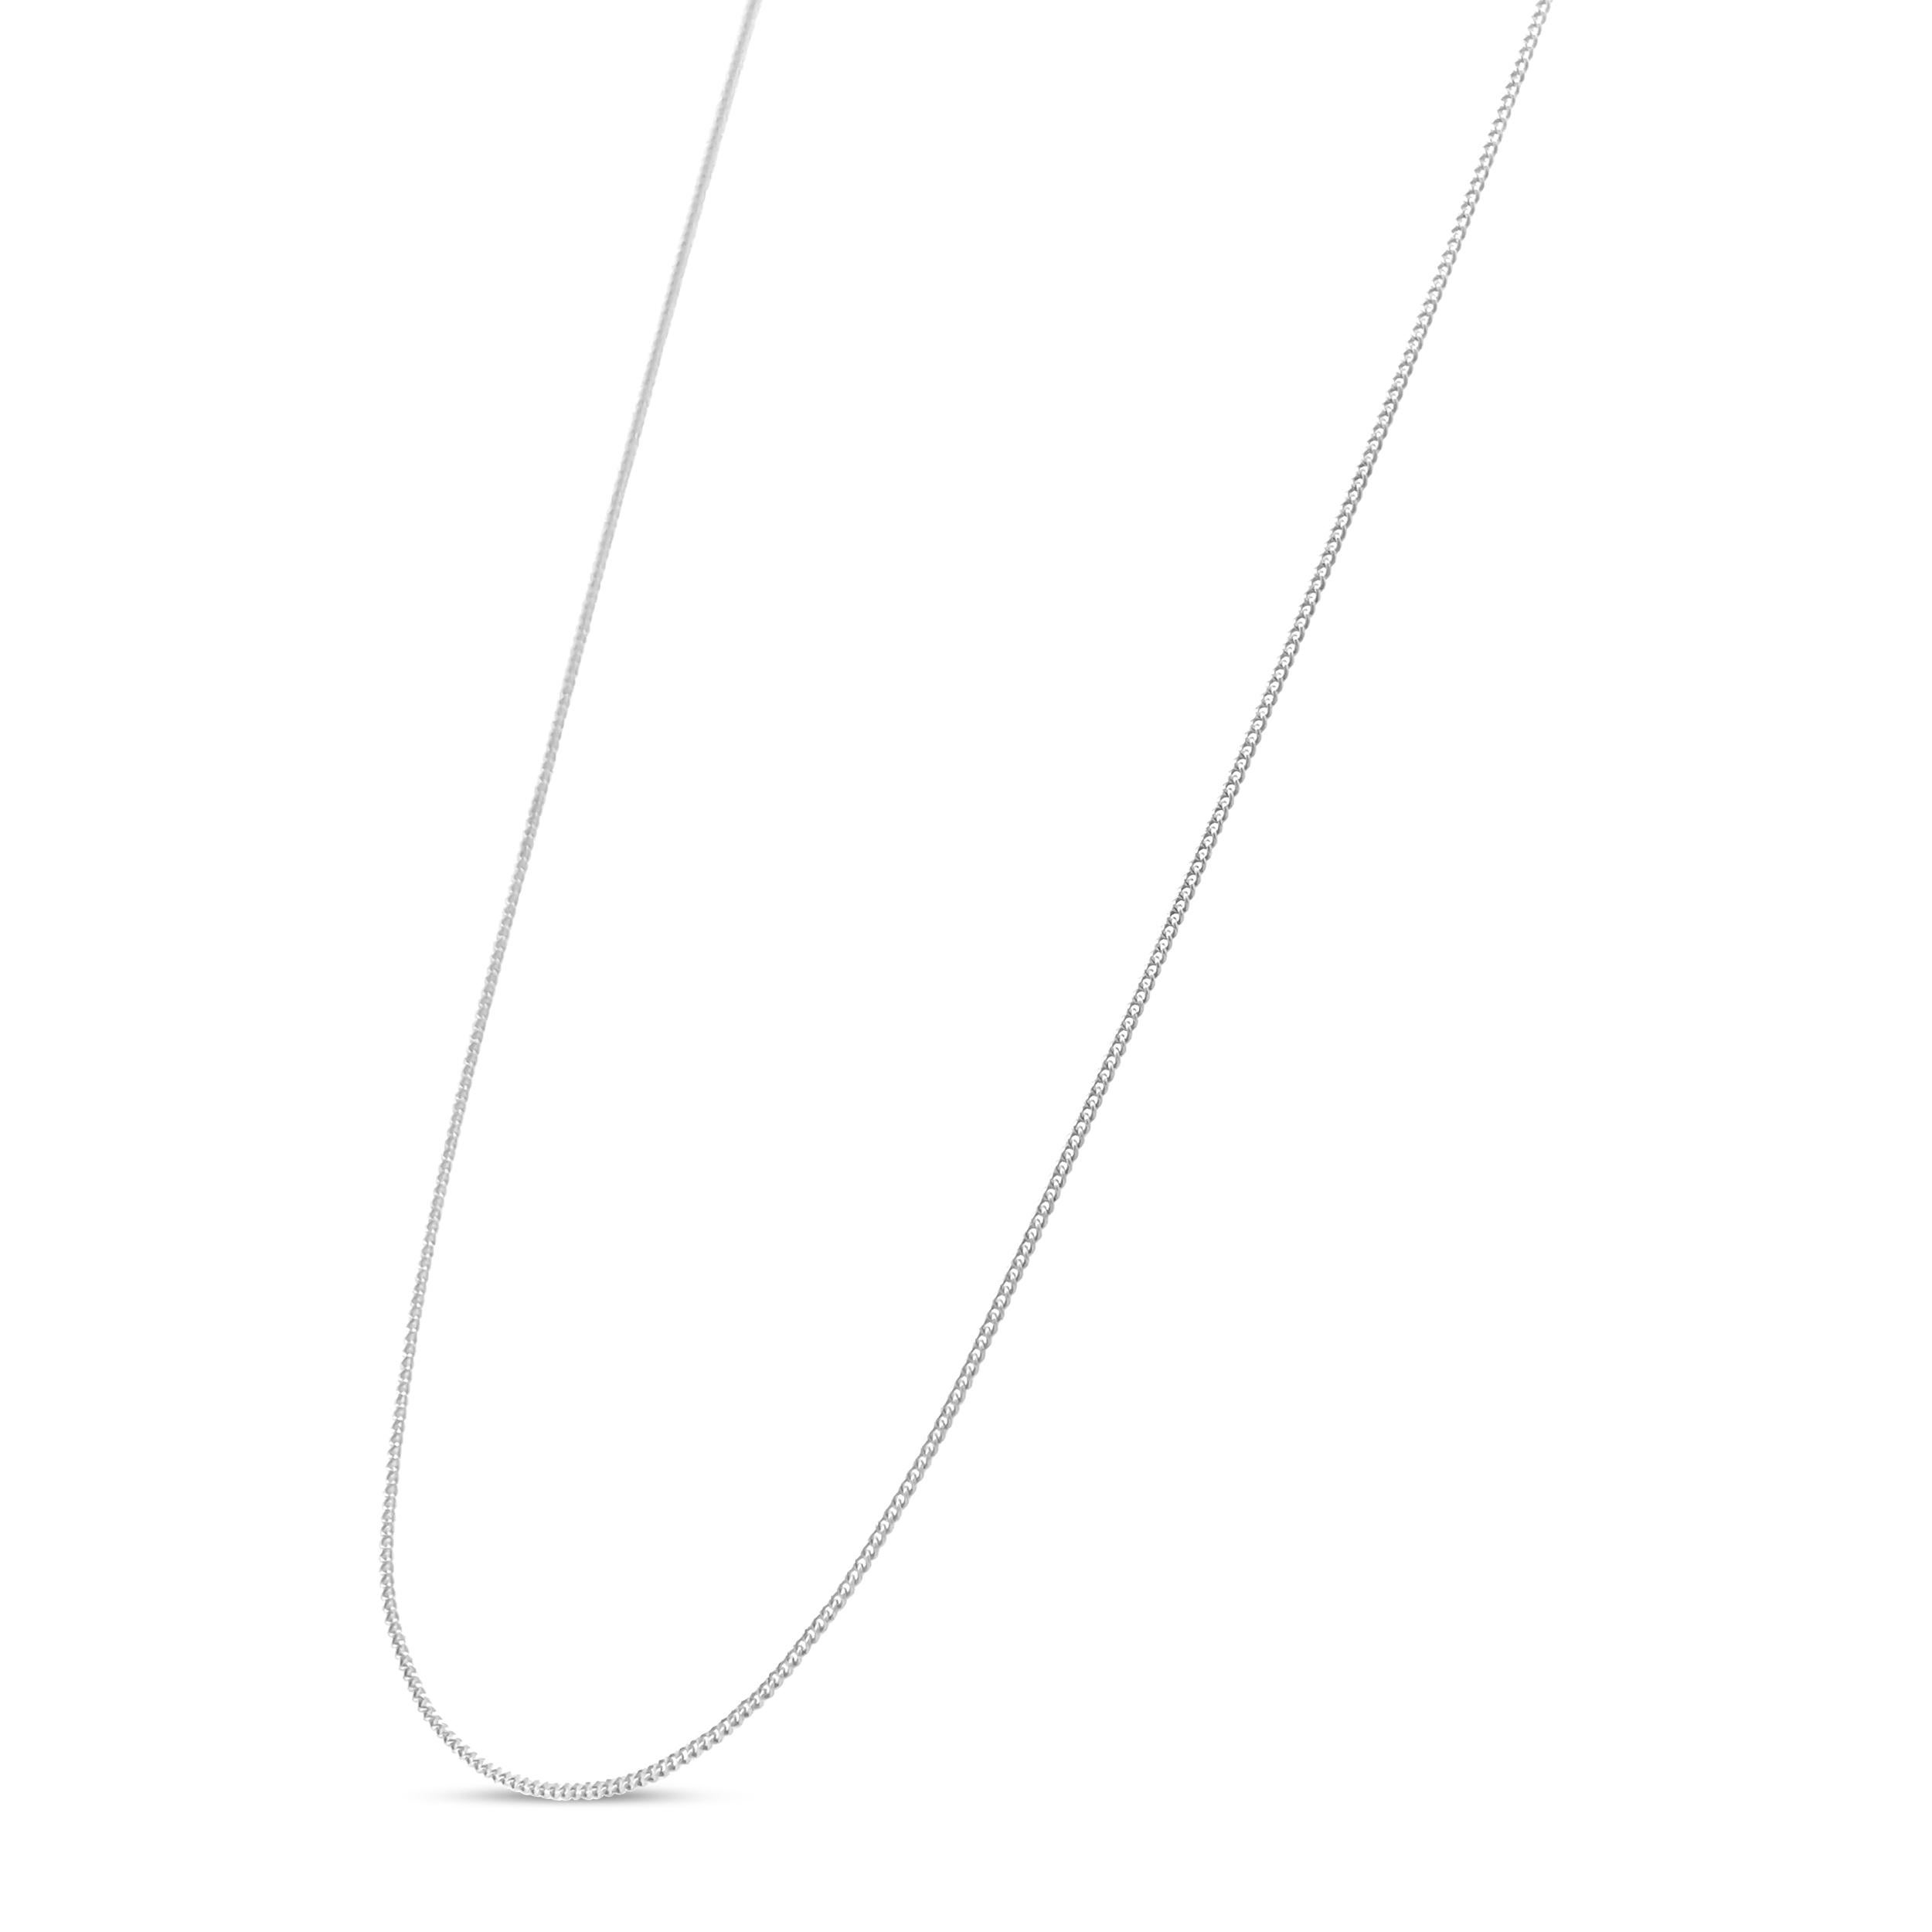 Presenting a feminine classic: a simple and dainty .925 sterling silver curb chain. This thin, .70 millimeter wide chain fastens securely with a standard spring ring clasp. It can replace most chains and is perfect paired with small to medium size